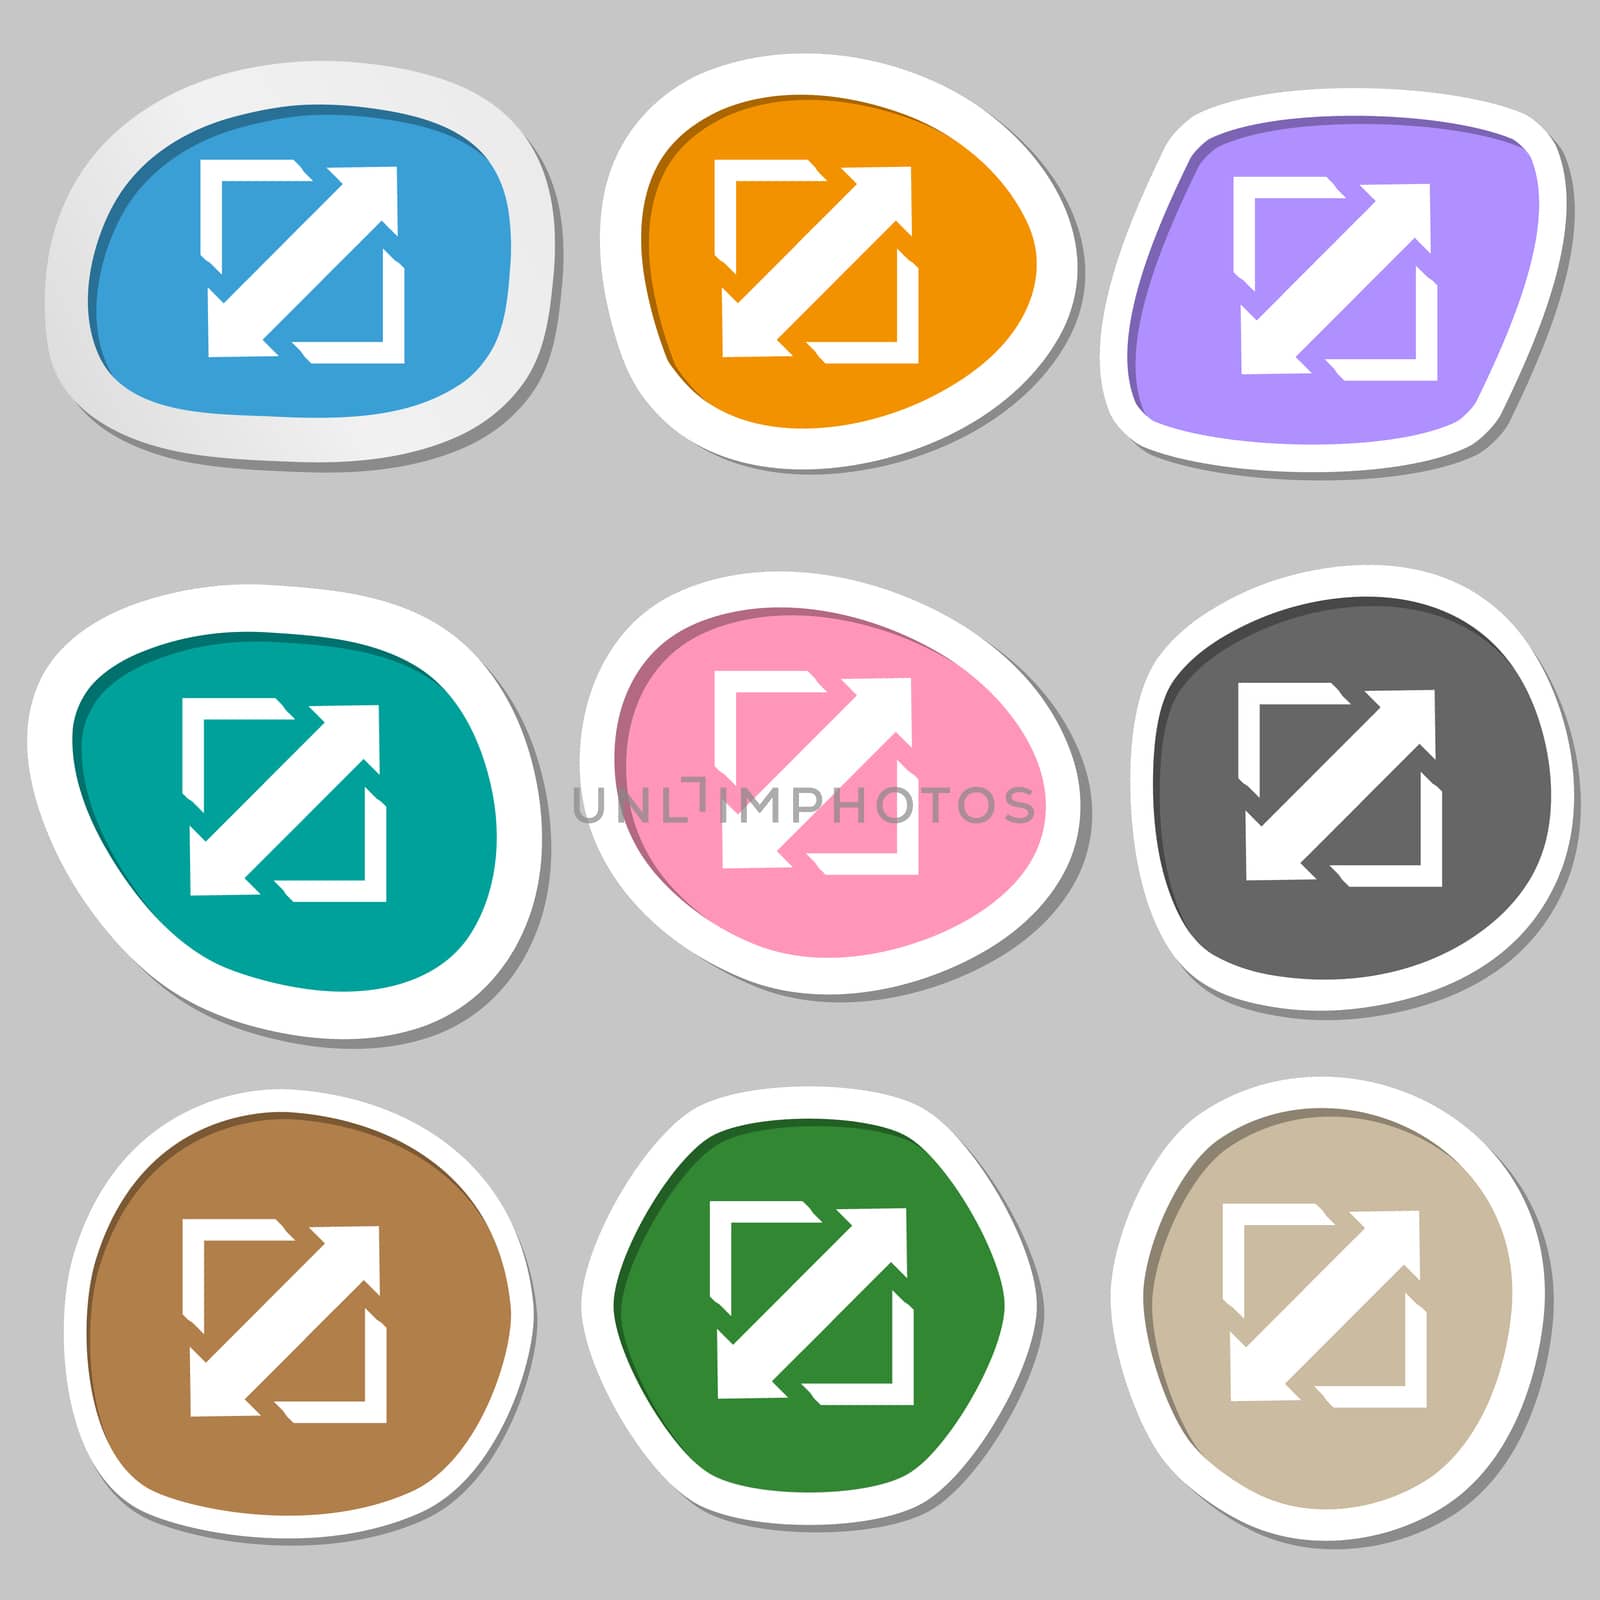 Deploying video, screen size icon sign. Multicolored paper stickers. illustration